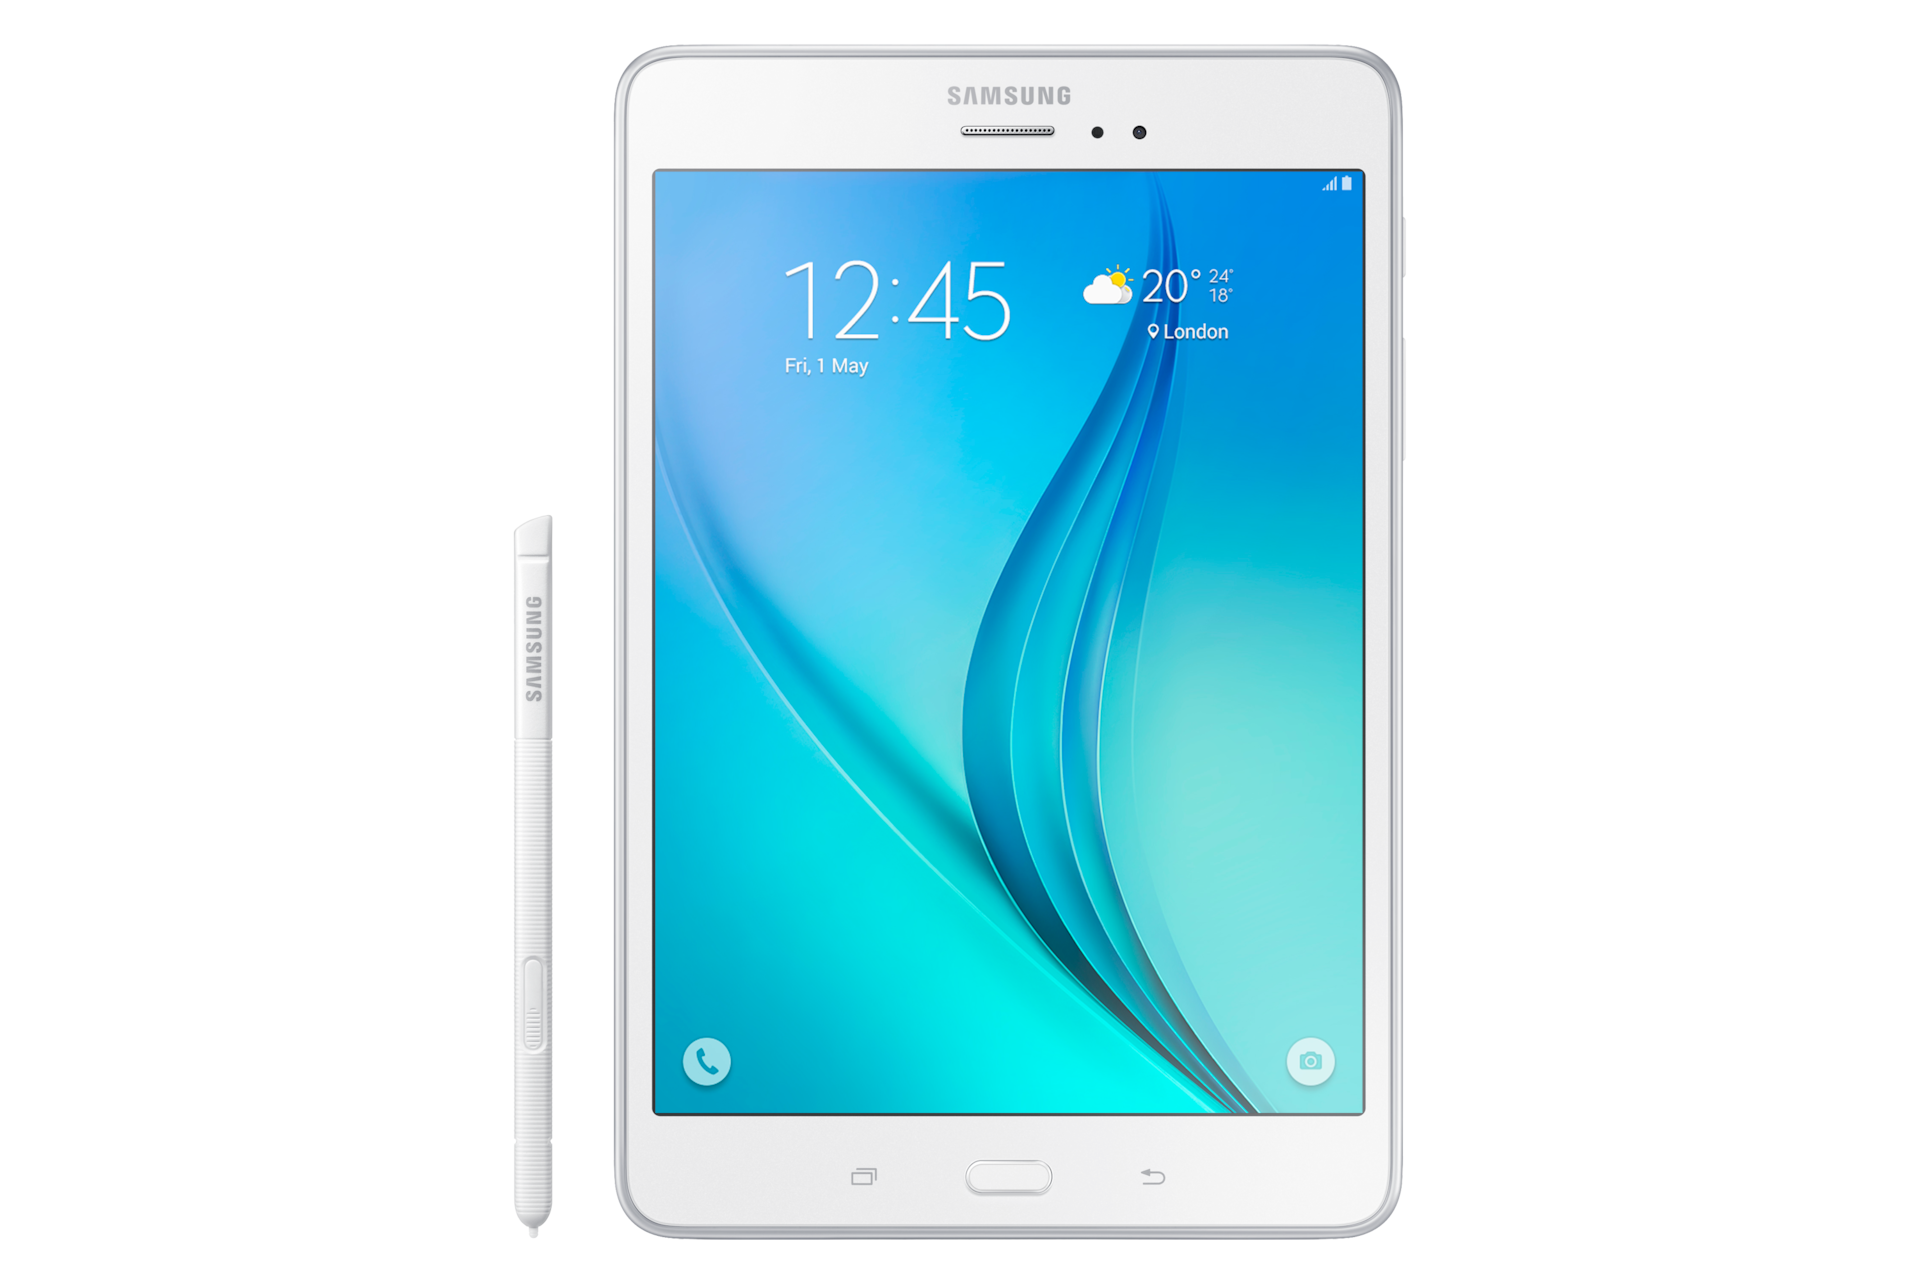 Samsung Galaxy Tab A 8.0 S Pen,4G LTE Price in Malaysia  Specs